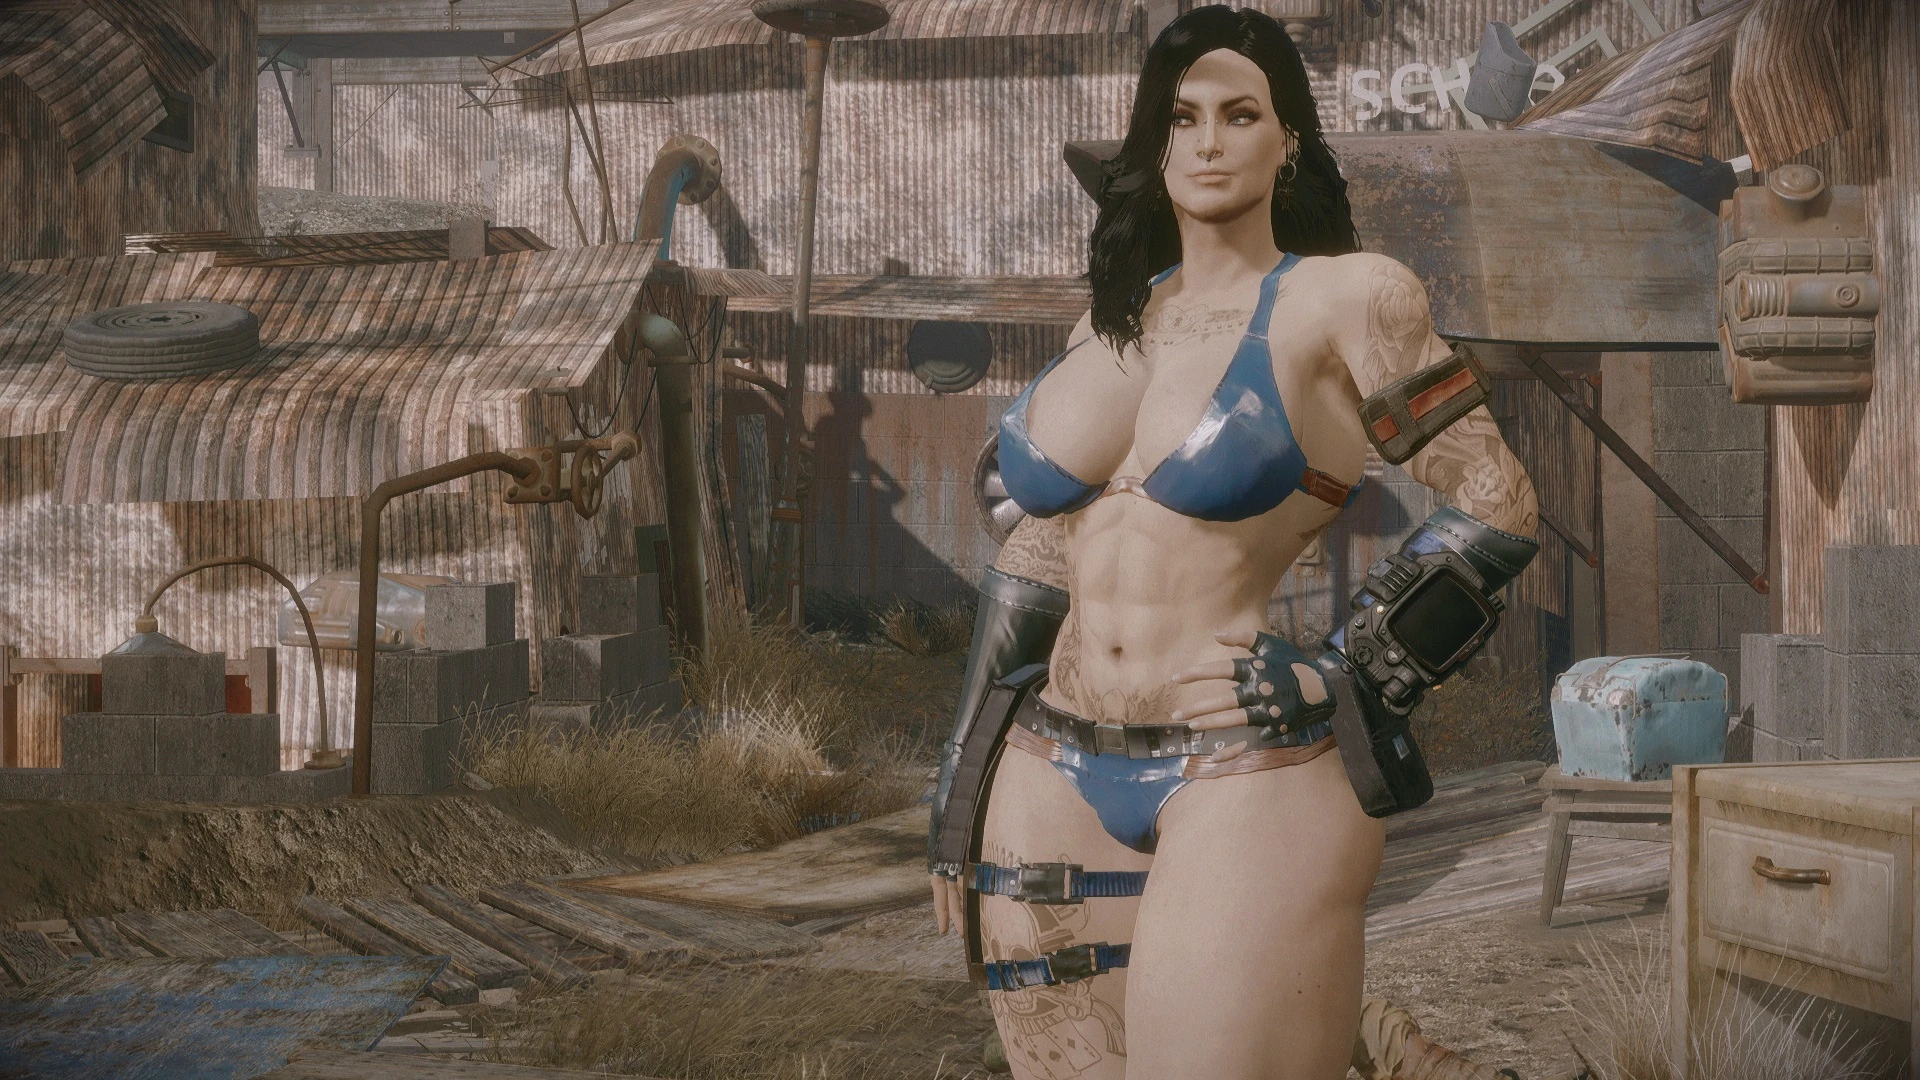 Another adult mod available for fallout 4 is commonwealth mini dresses. 